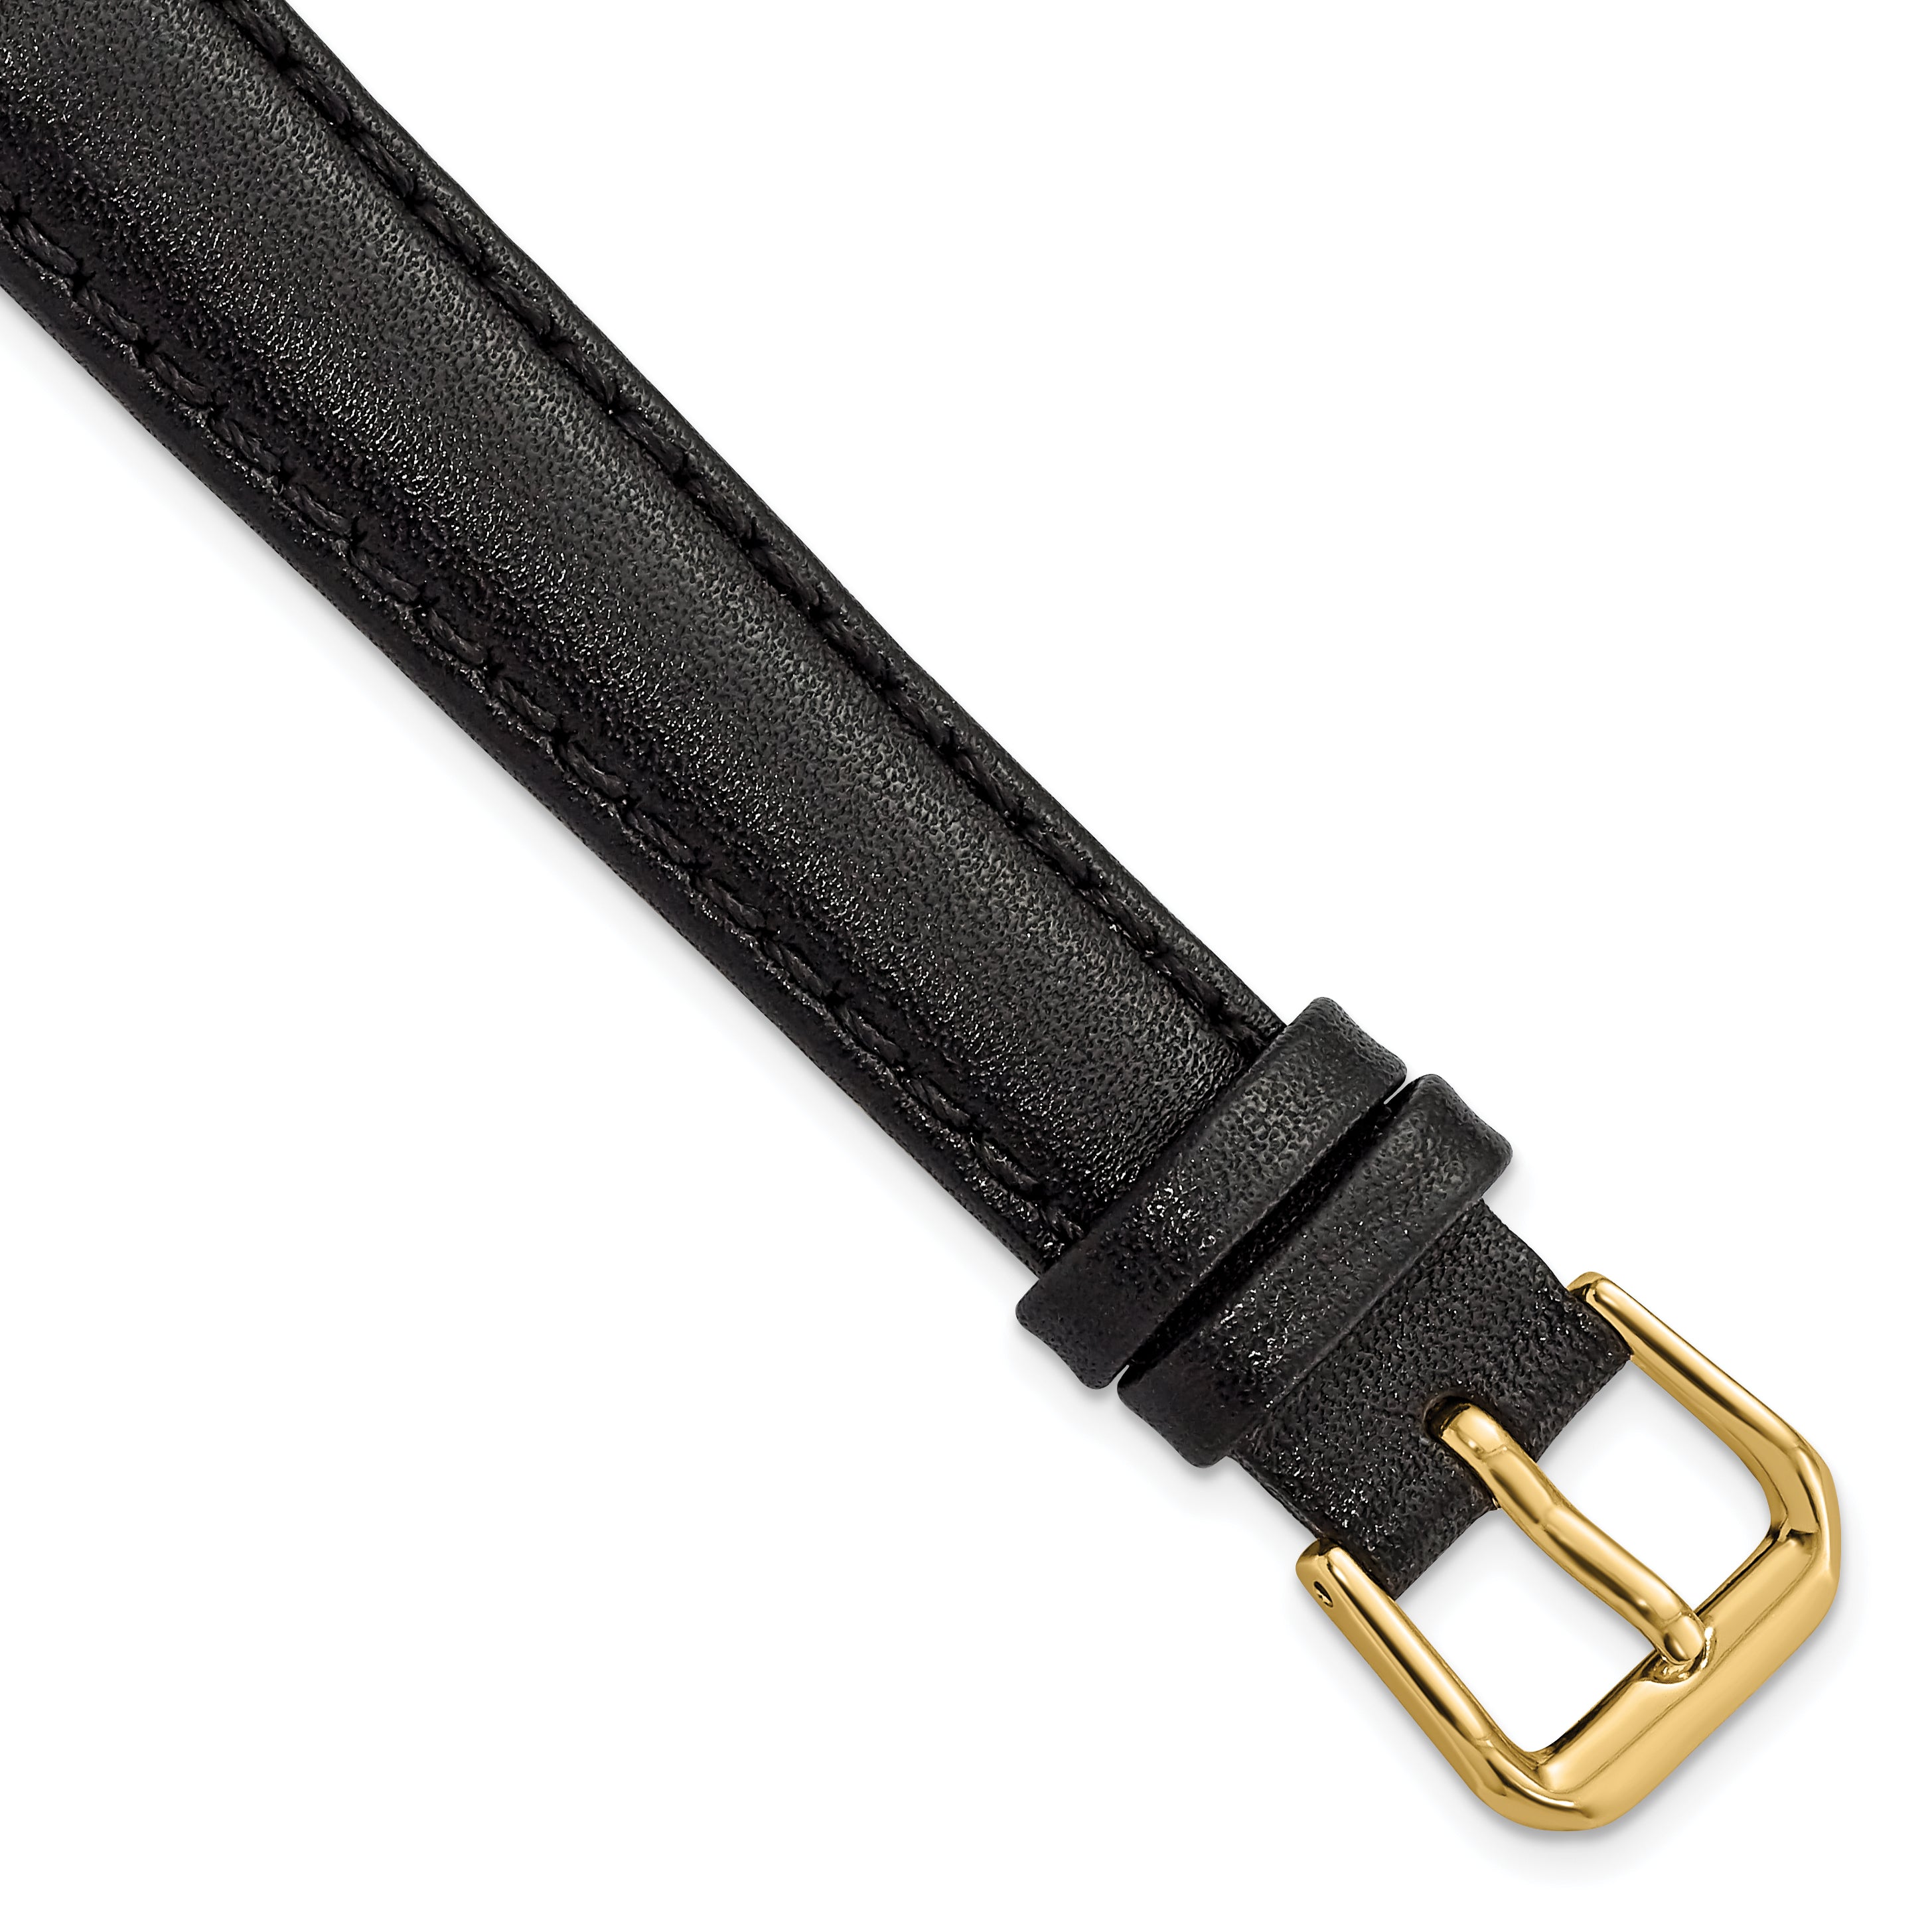 DeBeer 14mm Black Long Smooth Leather with Gold-tone Buckle 7.5 inch Watch Band